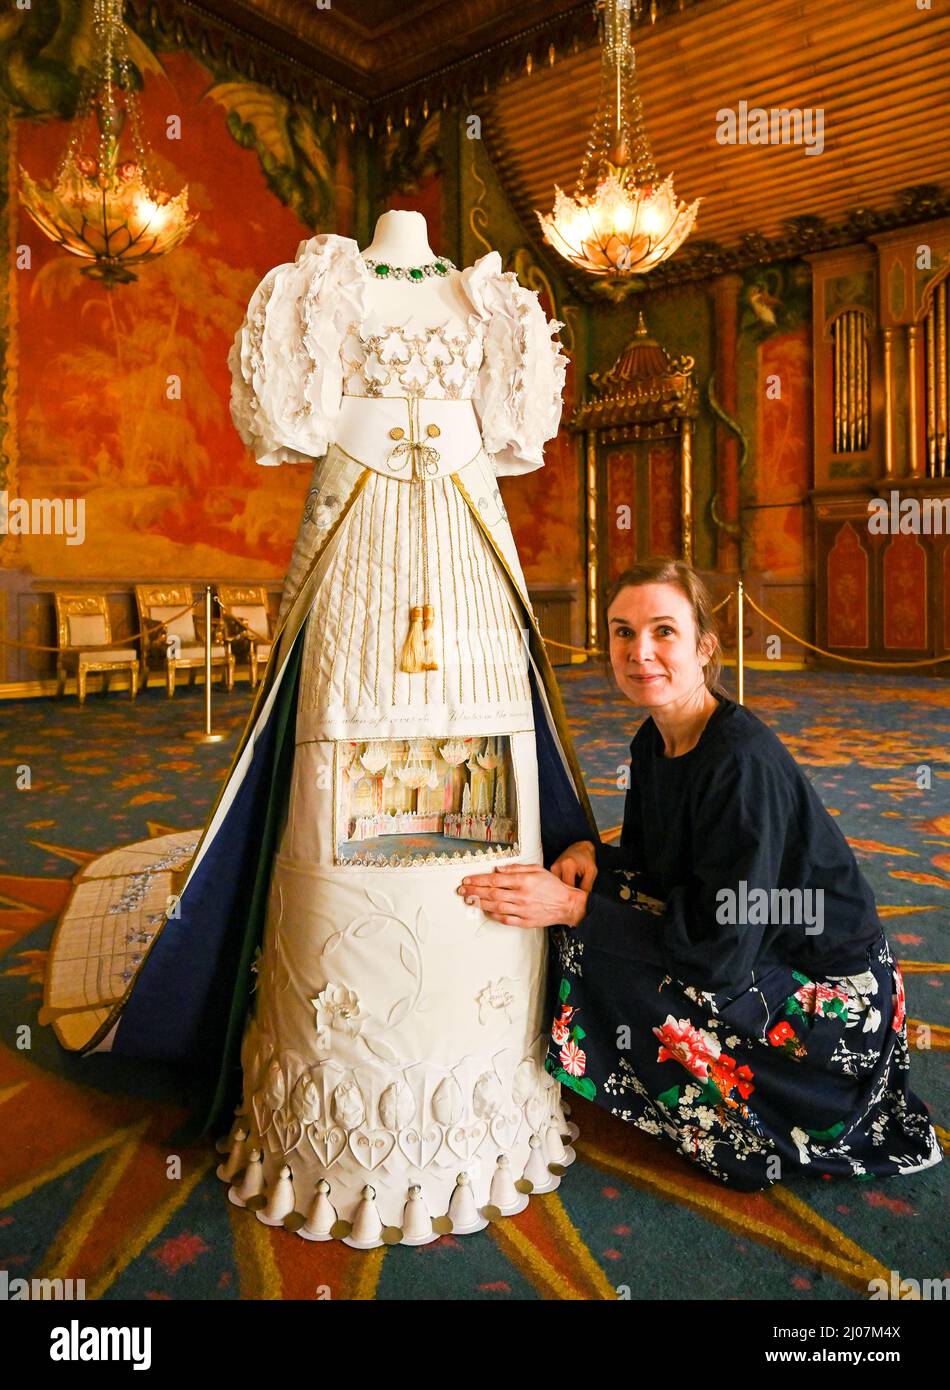 Brighton UK 17th March 2022 - Artist Stephanie Smart with her Symphony of Stars life-sized court dress in the Music Room at the launch of the Brighton Royal Pavilion's Regency Wardrobe exhibition which opens to the public on Saturday 19th March . The Regency Wardrobe is a collection of imagined garments reflecting the fashion, style and history of the Regency period created by artist Stephanie Smart  : Credit Simon Dack / Alamy Live News Stock Photo